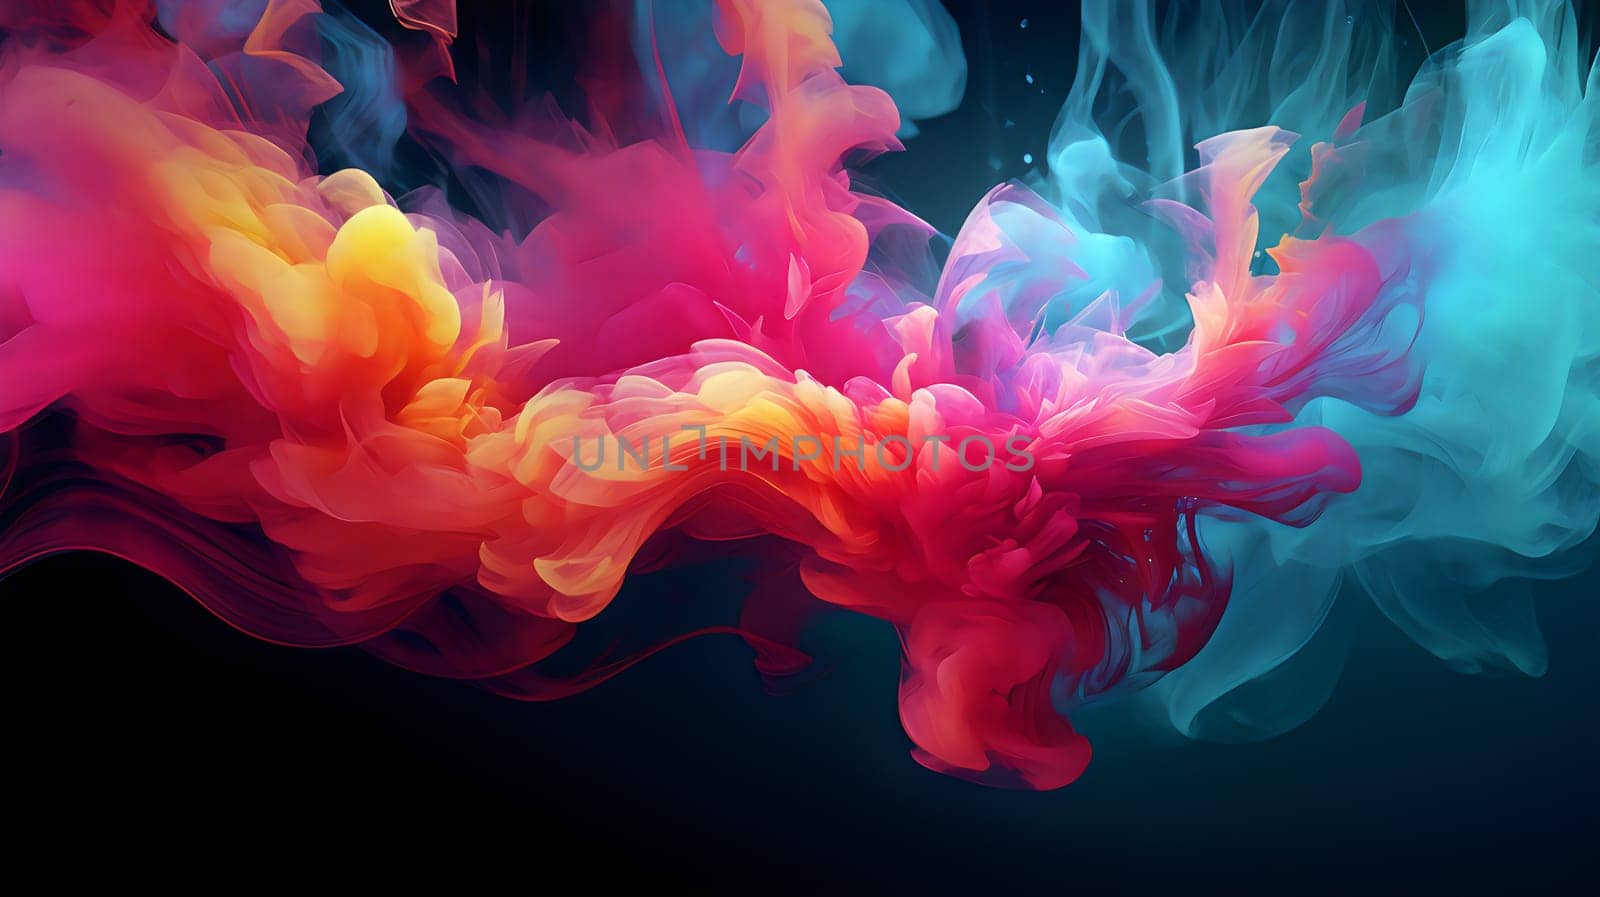 A colorful liquid organic swirl - abstract background by chrisroll